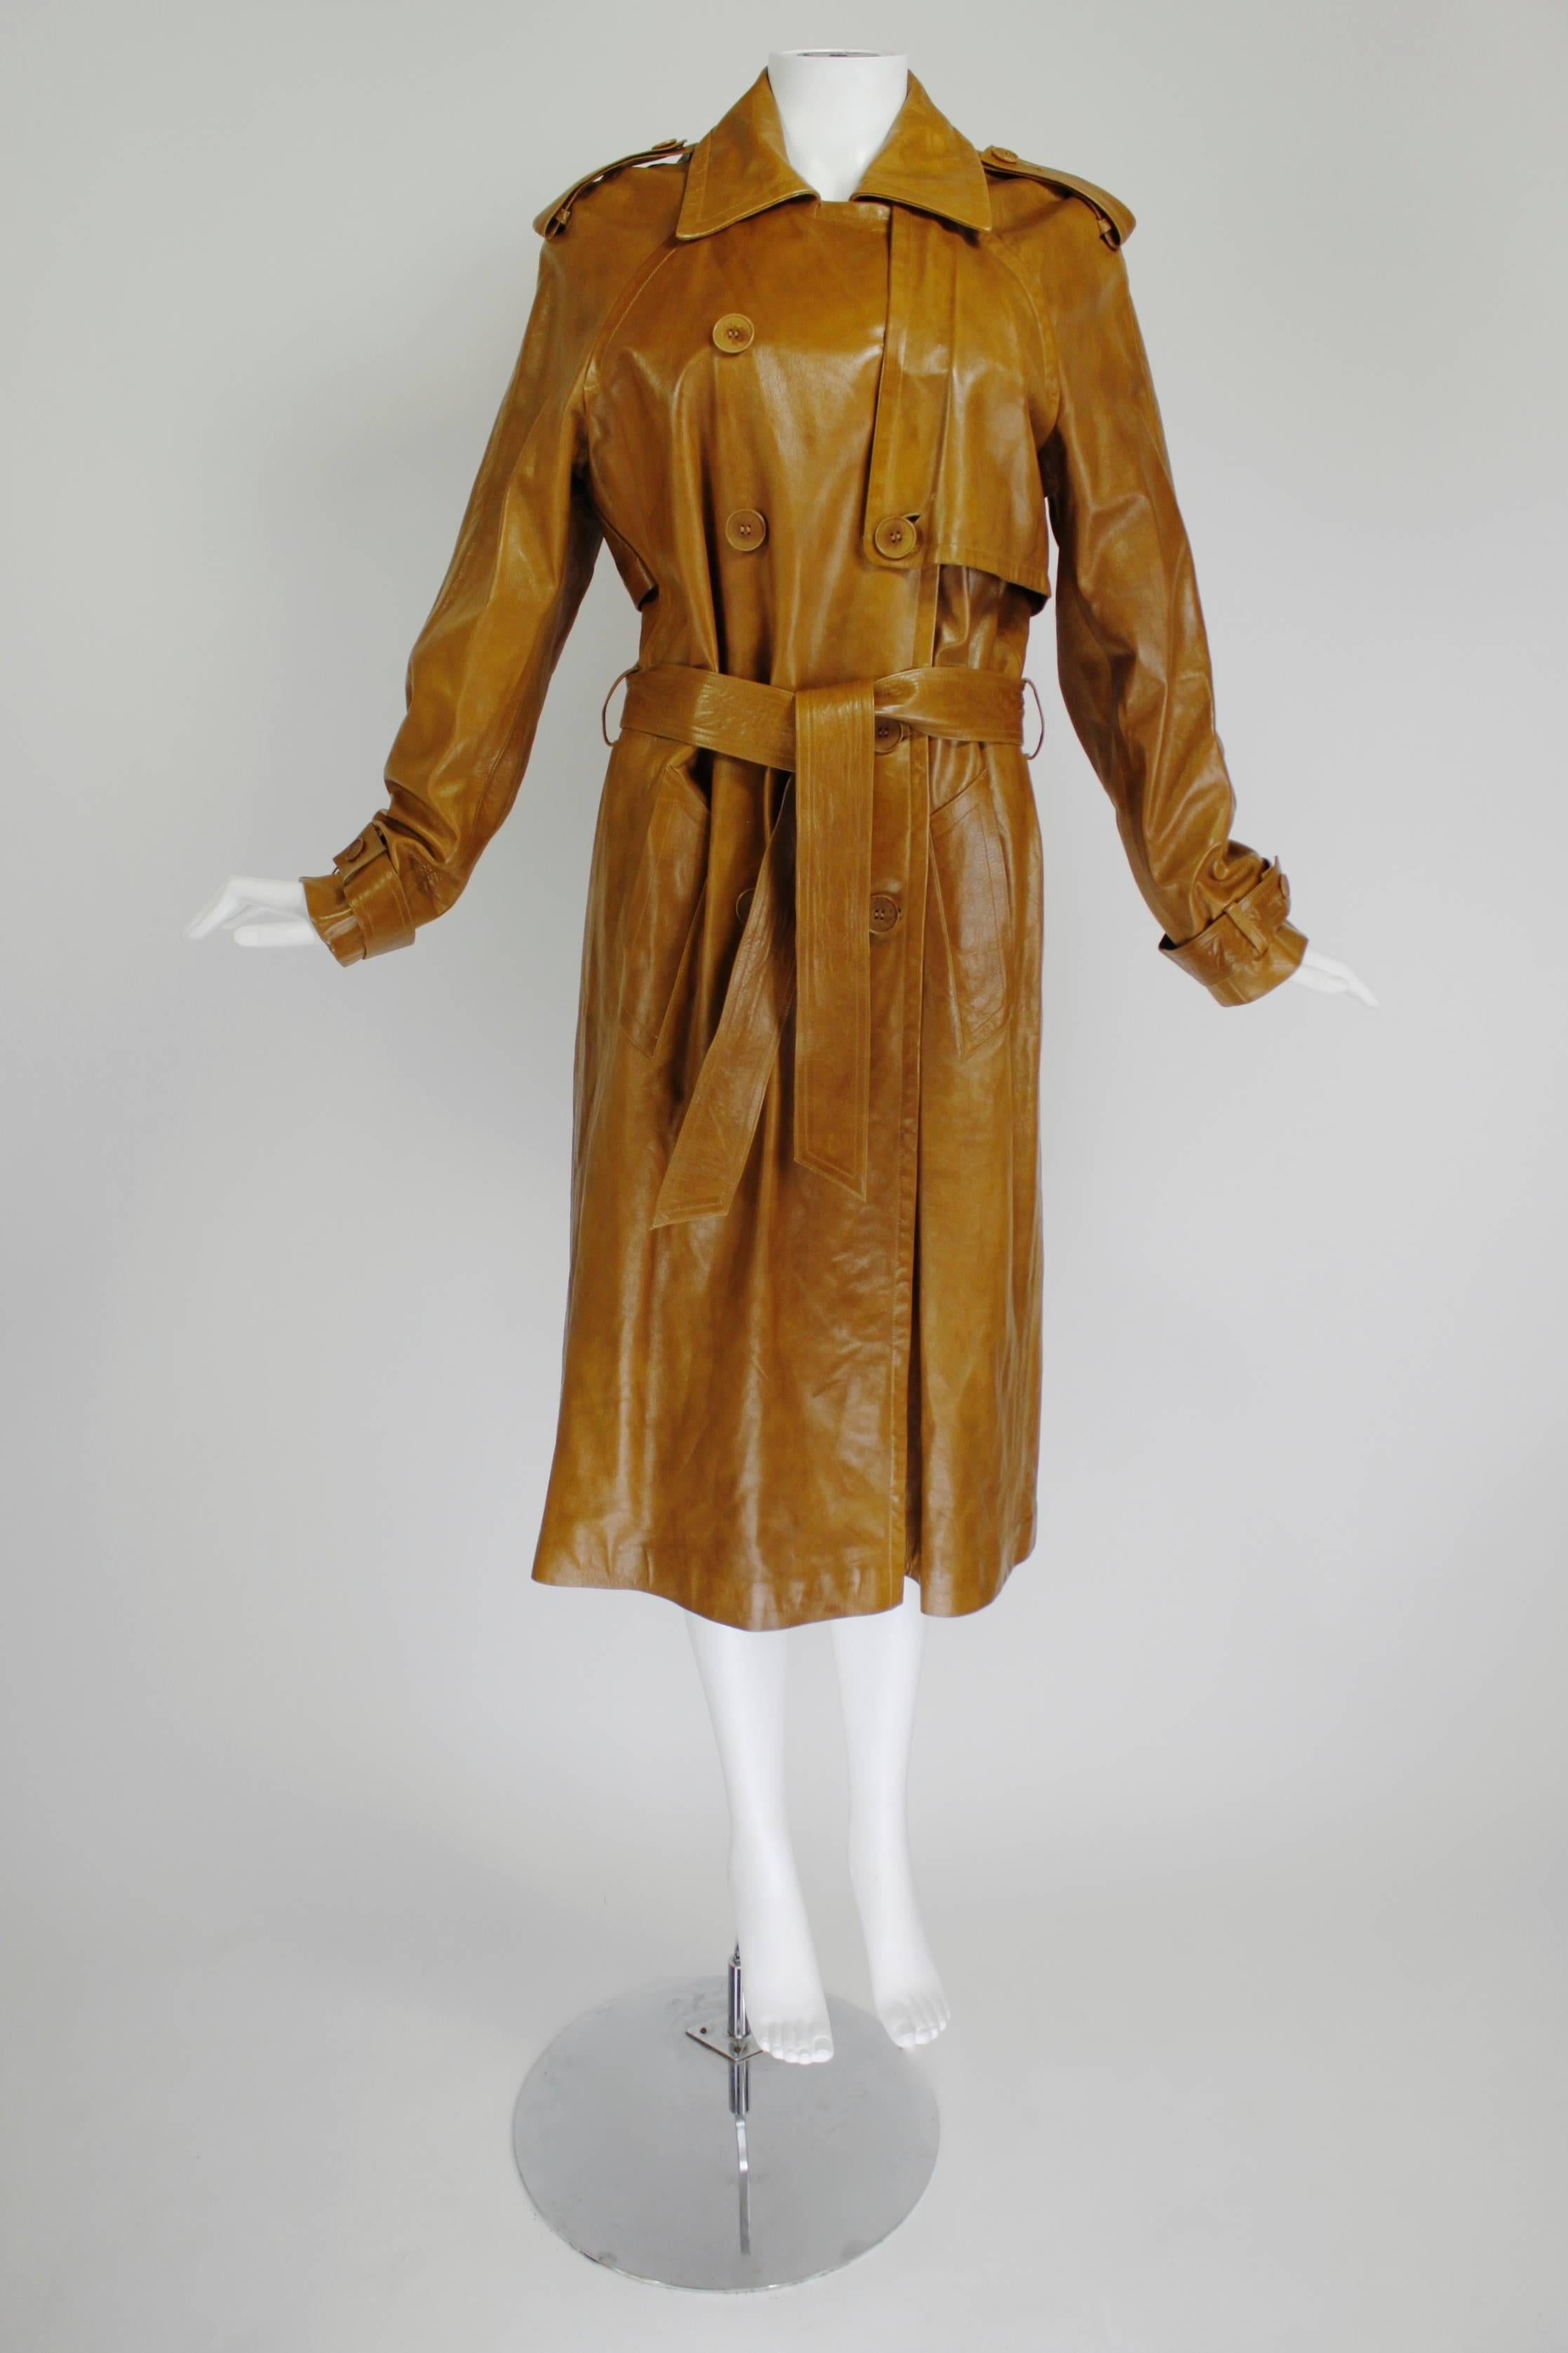 Plein Sud's take on the classic trench coat features luxe caramel leather, double-breasted buttons, and a belt to cinch the waist. Fully lined. 

Measurements--
Marked a size 42/US 10
Bust: 38 inches
Waist: up to 34 inches
Length, Center Back